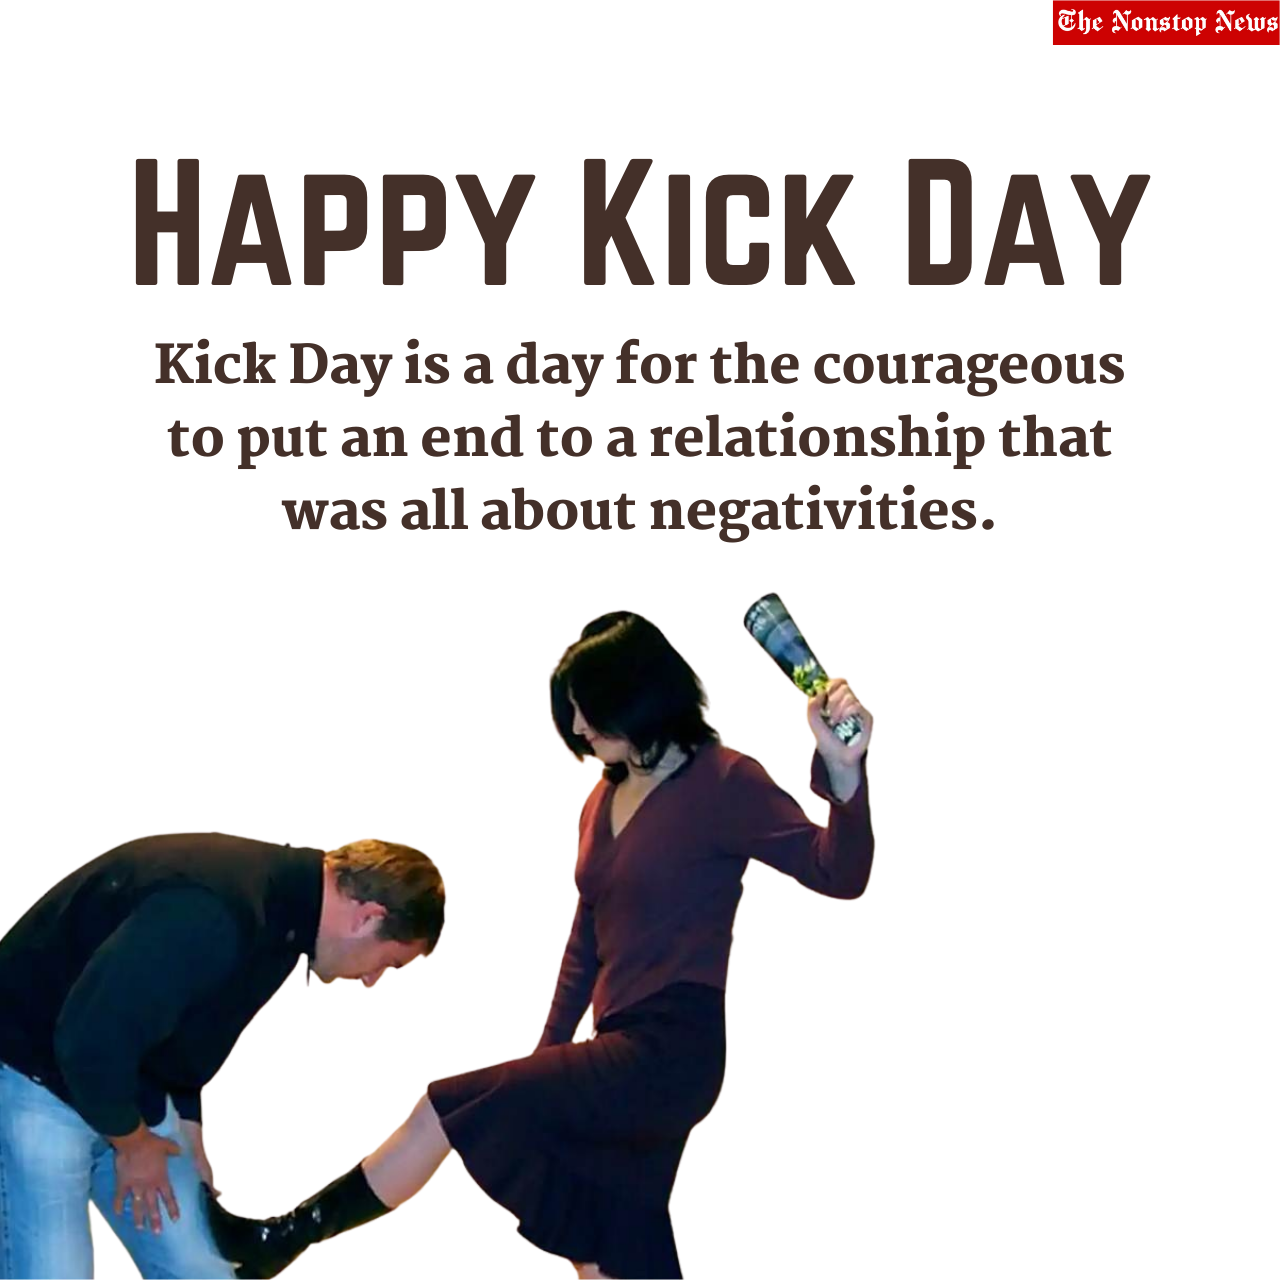 Kick Day 2022 Wishes, Greetings, HD Images, Messages, Quotes, Wallpaper, WhatsApp Status Video to Download to celebrate the 2nd day of Anti-Valentine week